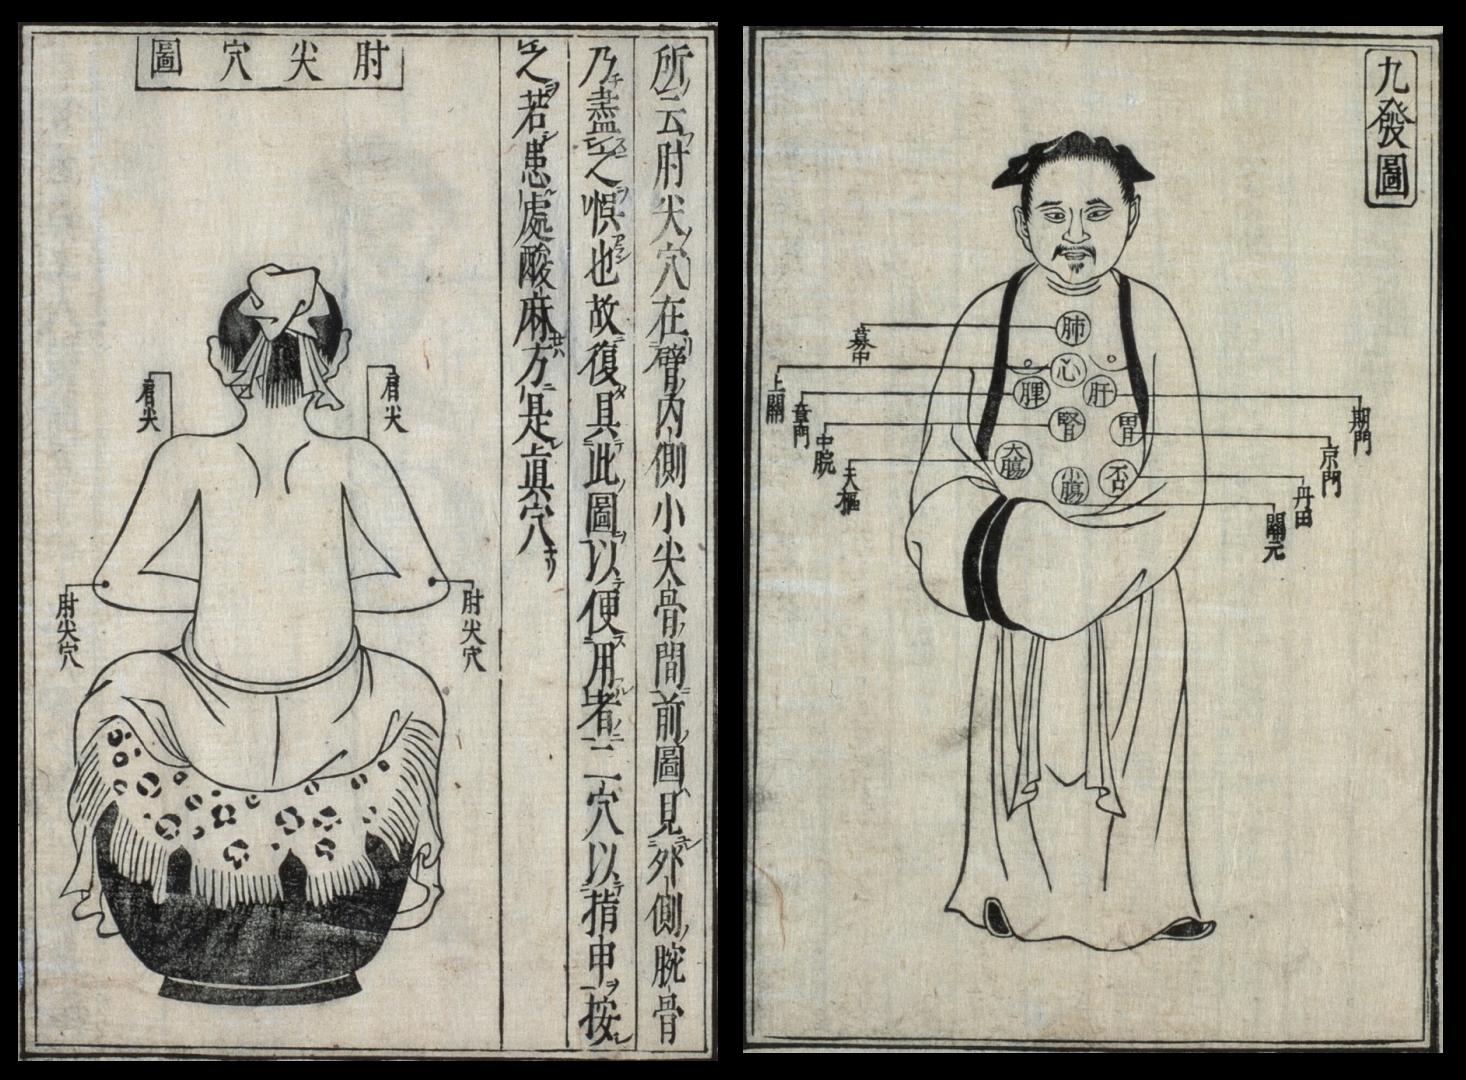 Japanese rare medical text bodily schematics